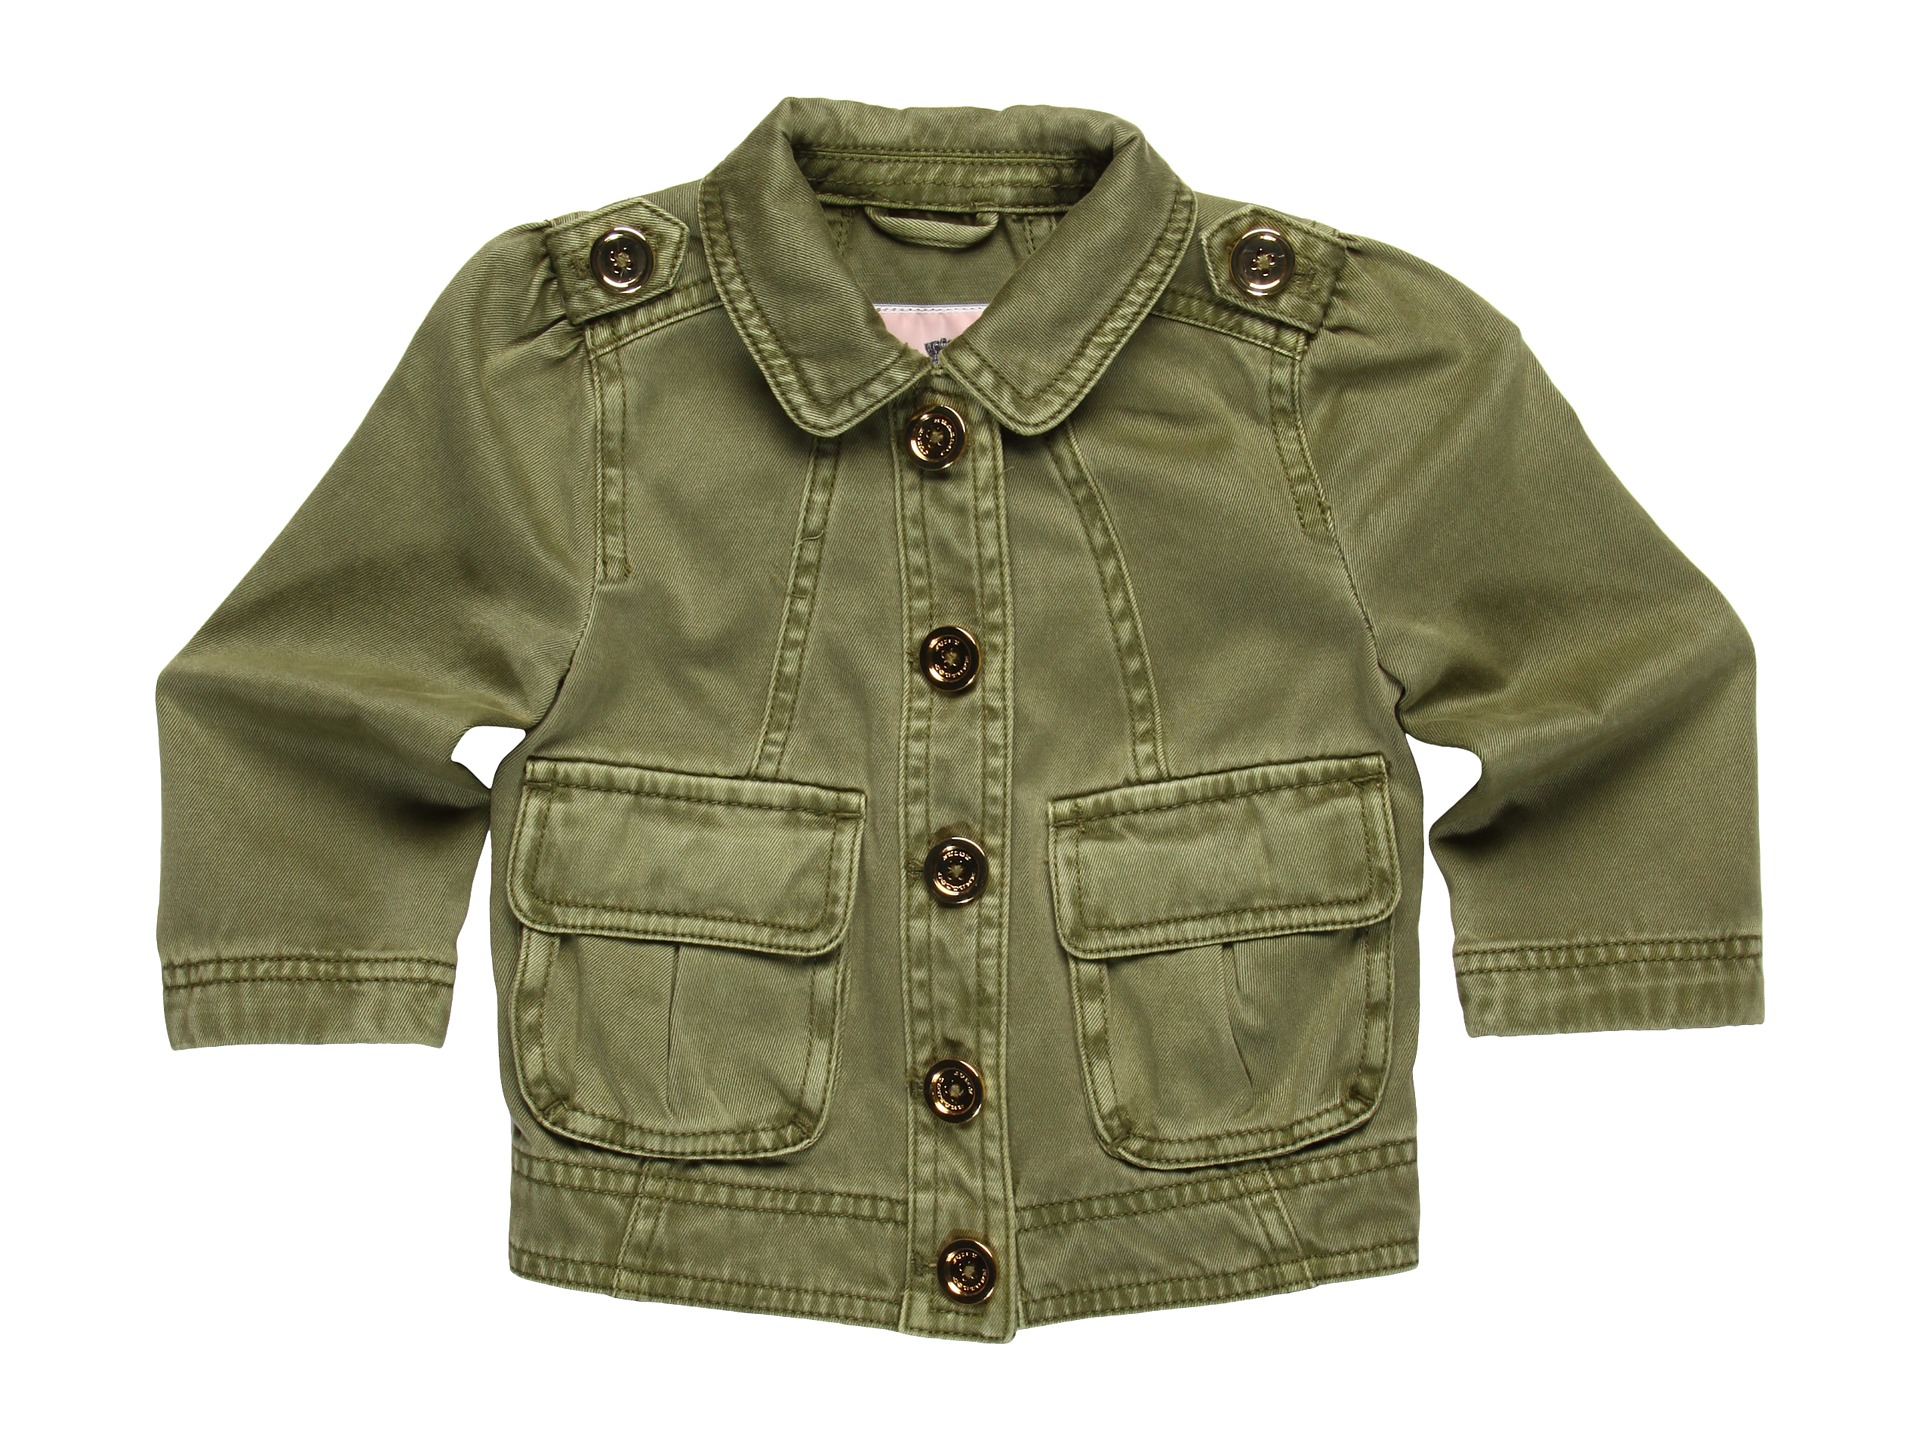 Juicy Couture Kids   Girls Military Jacket (Toddler/Little Kids)